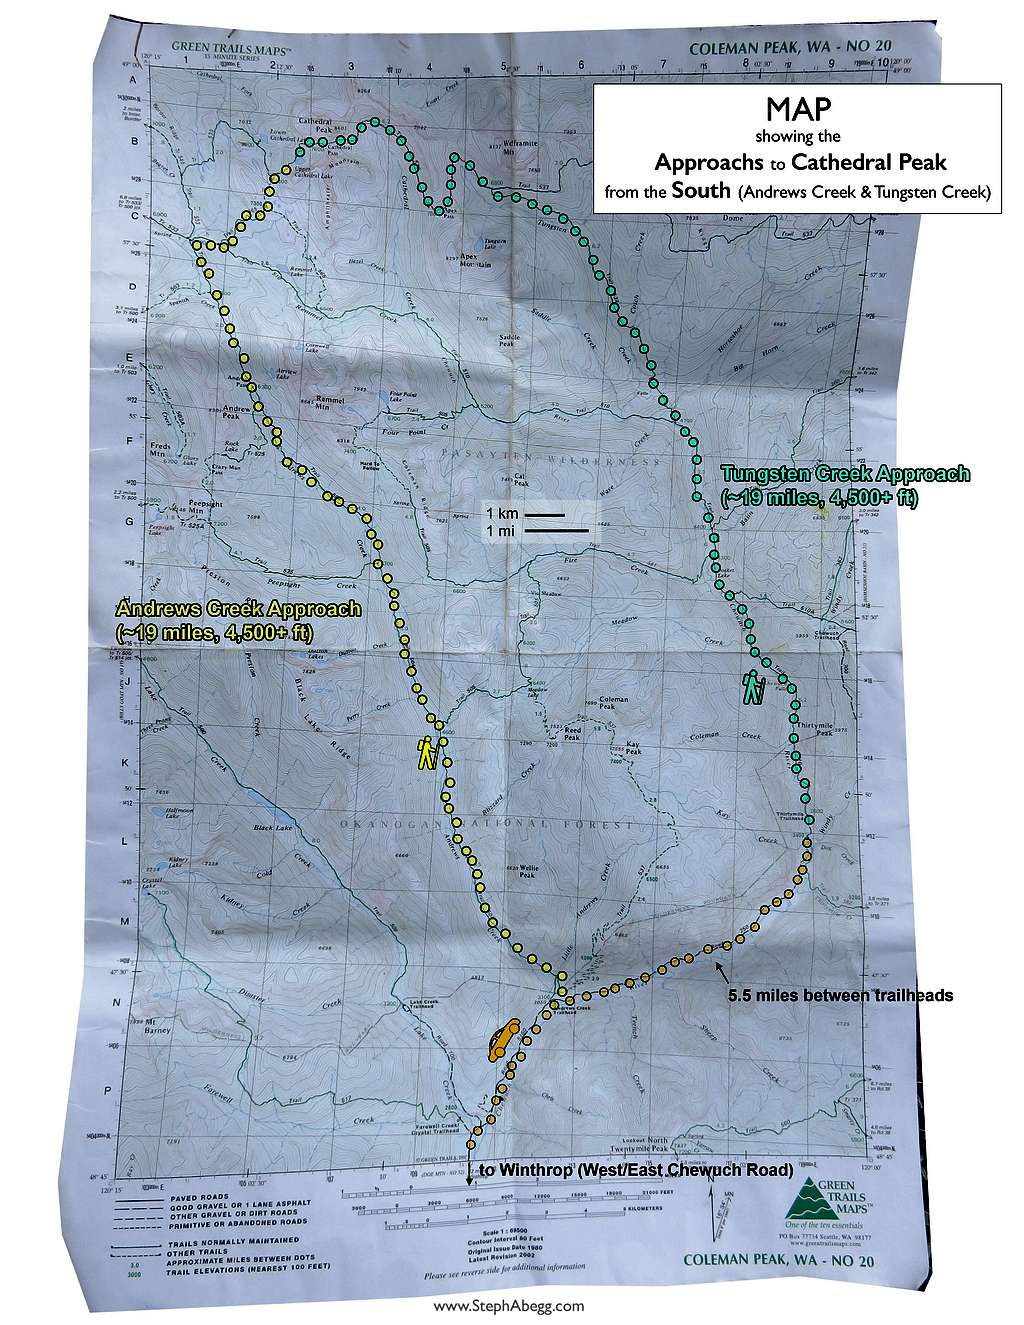 Map showing approach to Cathedral Peak from the south (US approach)